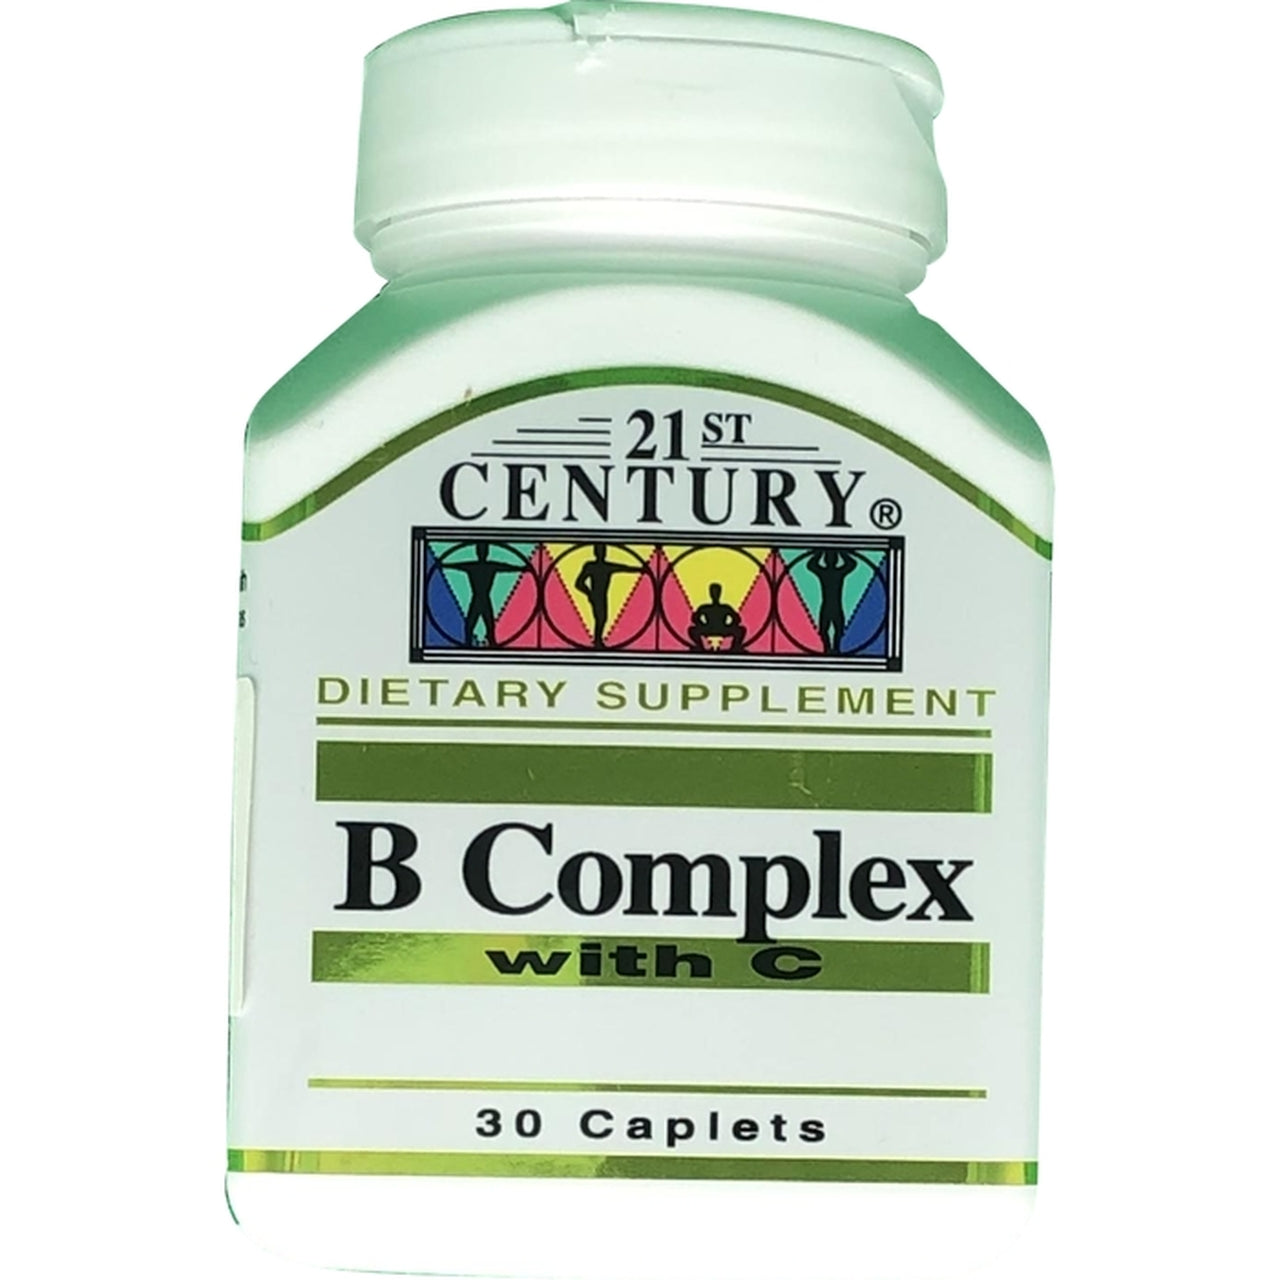 21ST CENTURY B Complex with C Tabs 30s - Med7 Online